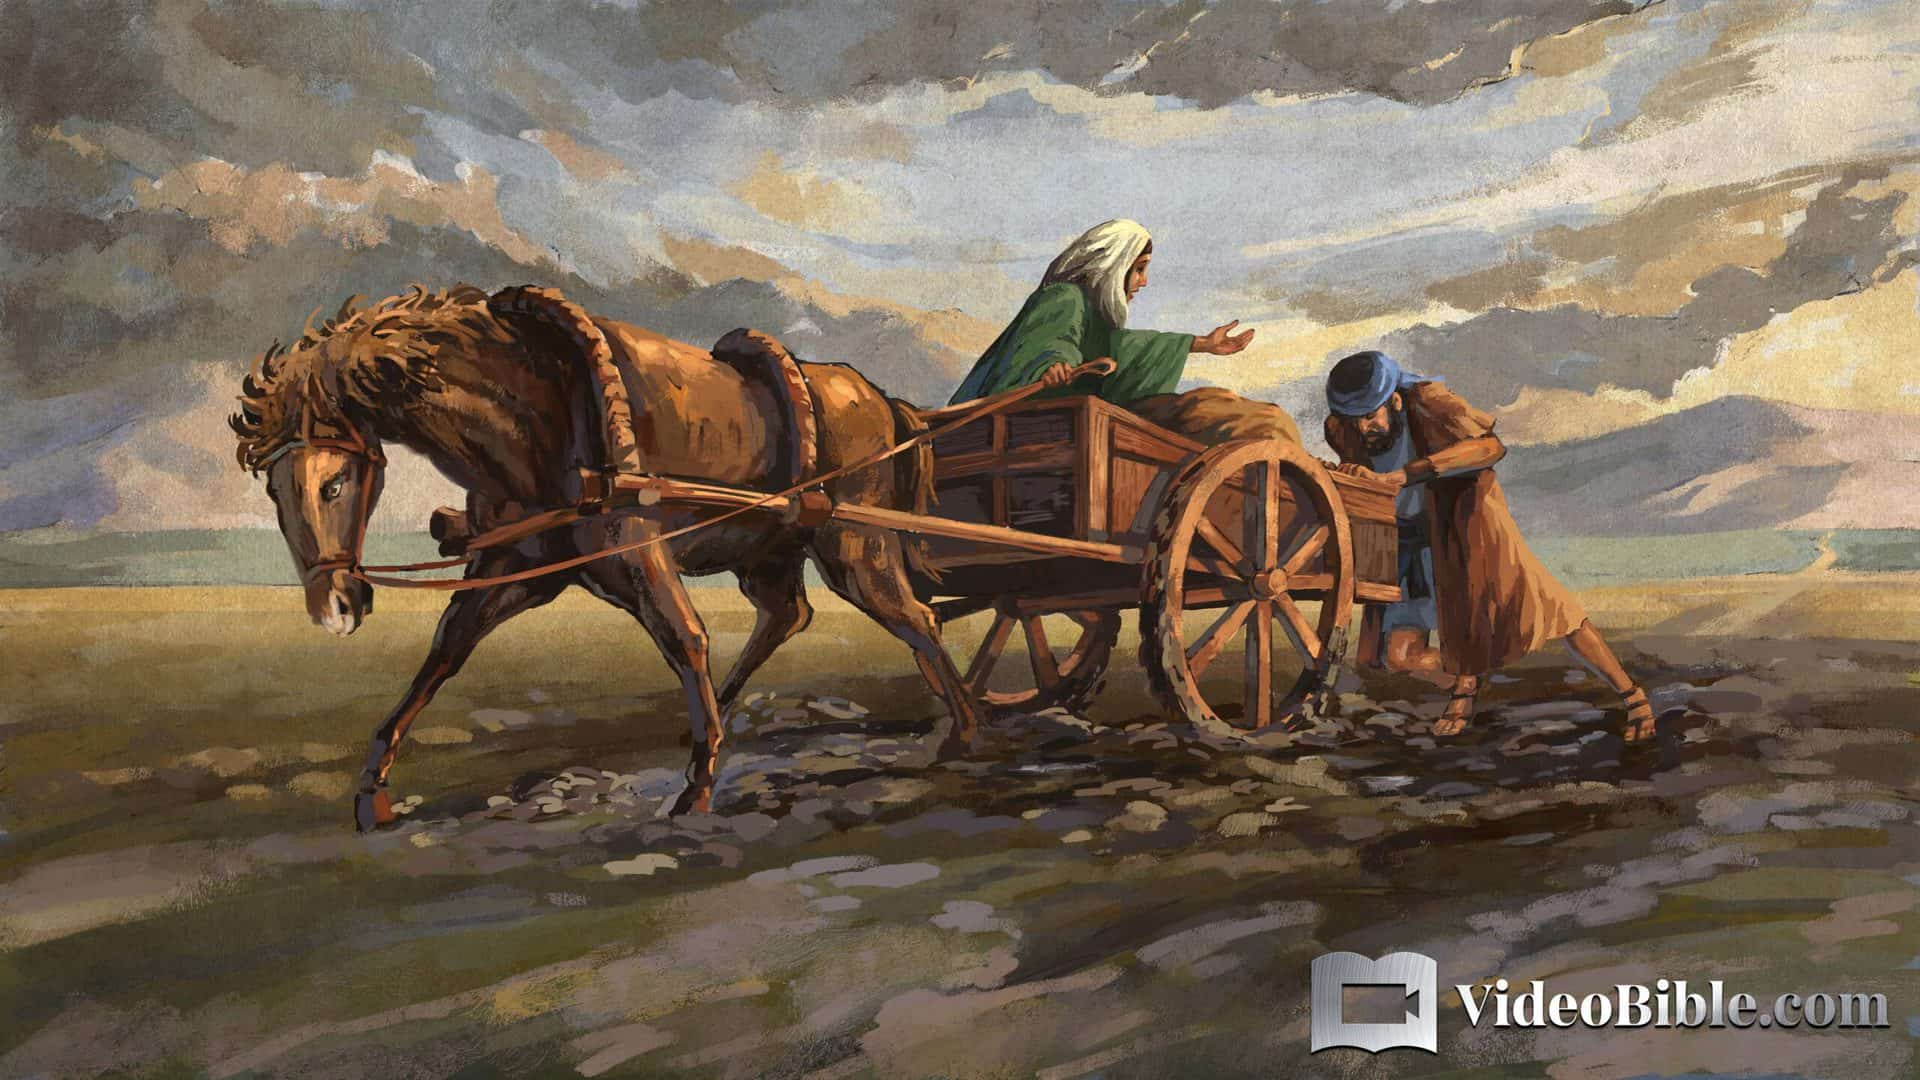 woman stuck in the mud in a cart while man pushes her and the horse out of mud